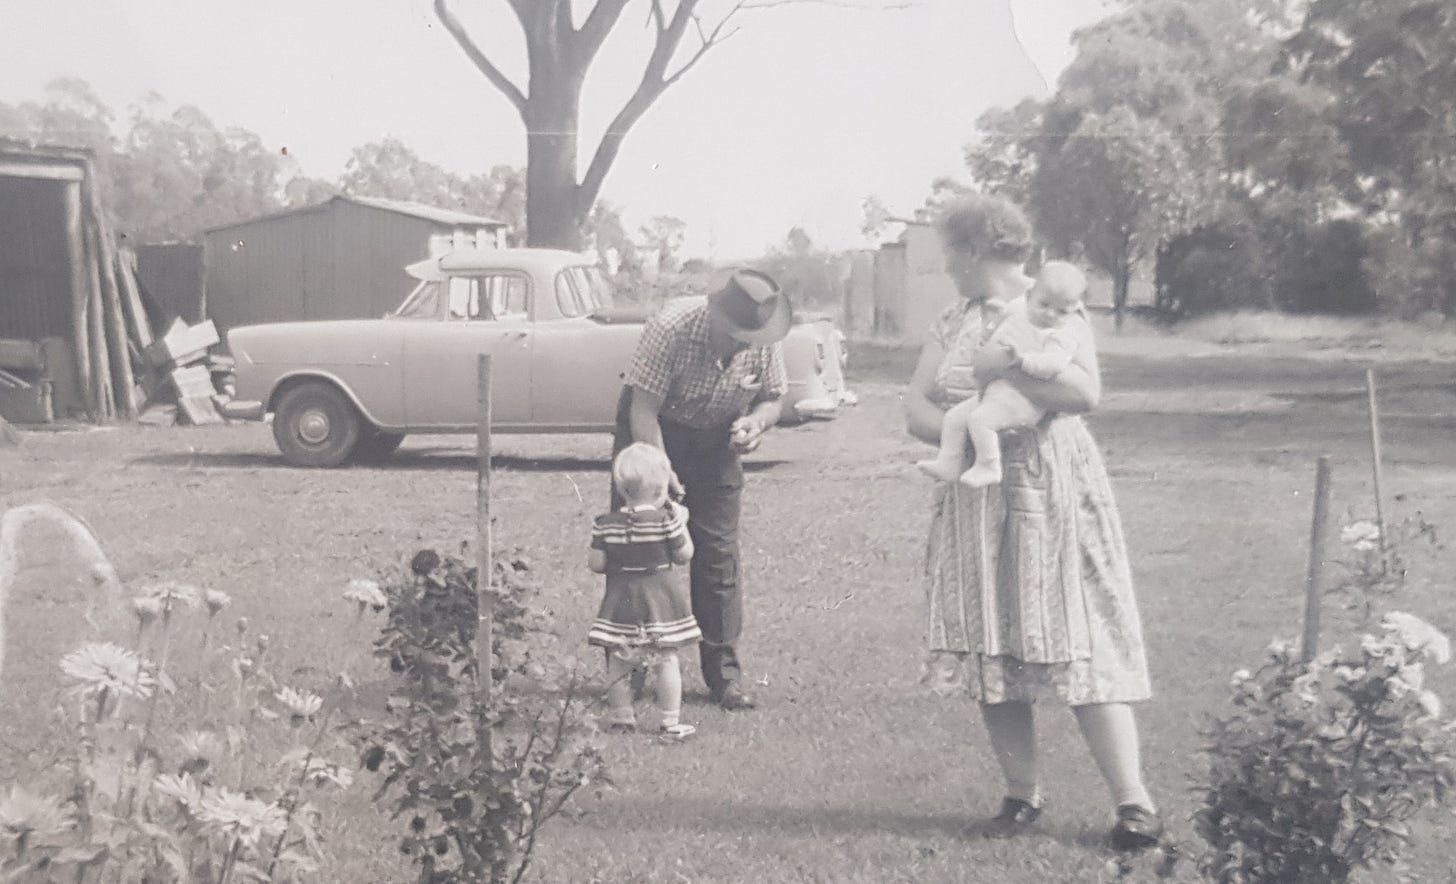 Black and white photo from 1961, grandfather wearing hat, grandmother wearing apron, toddler, baby, utility vehicle